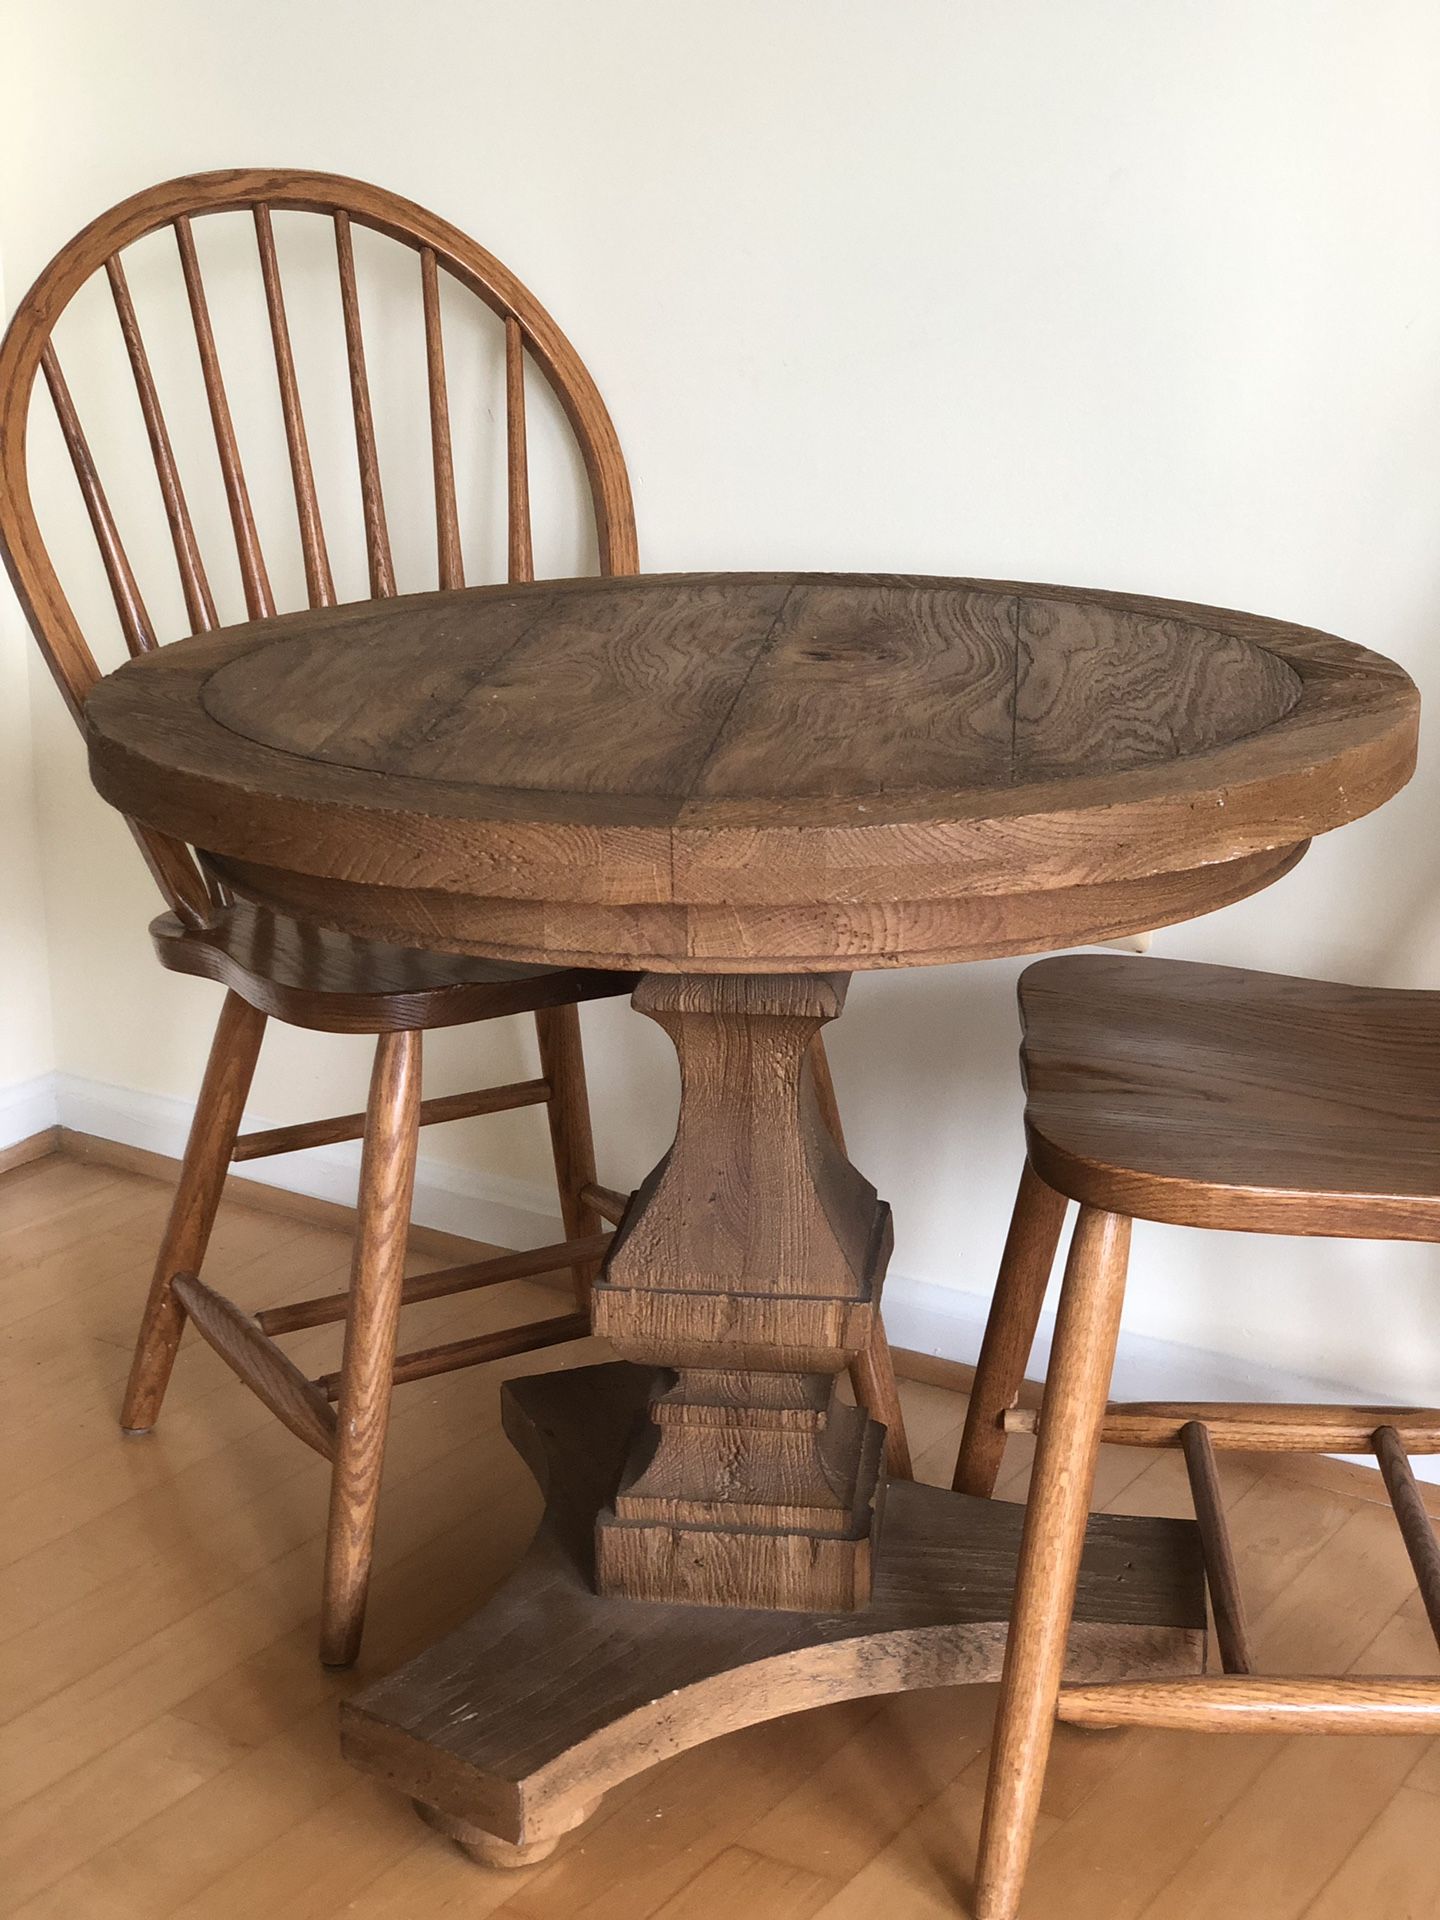 Rustic round wooden table & chairs